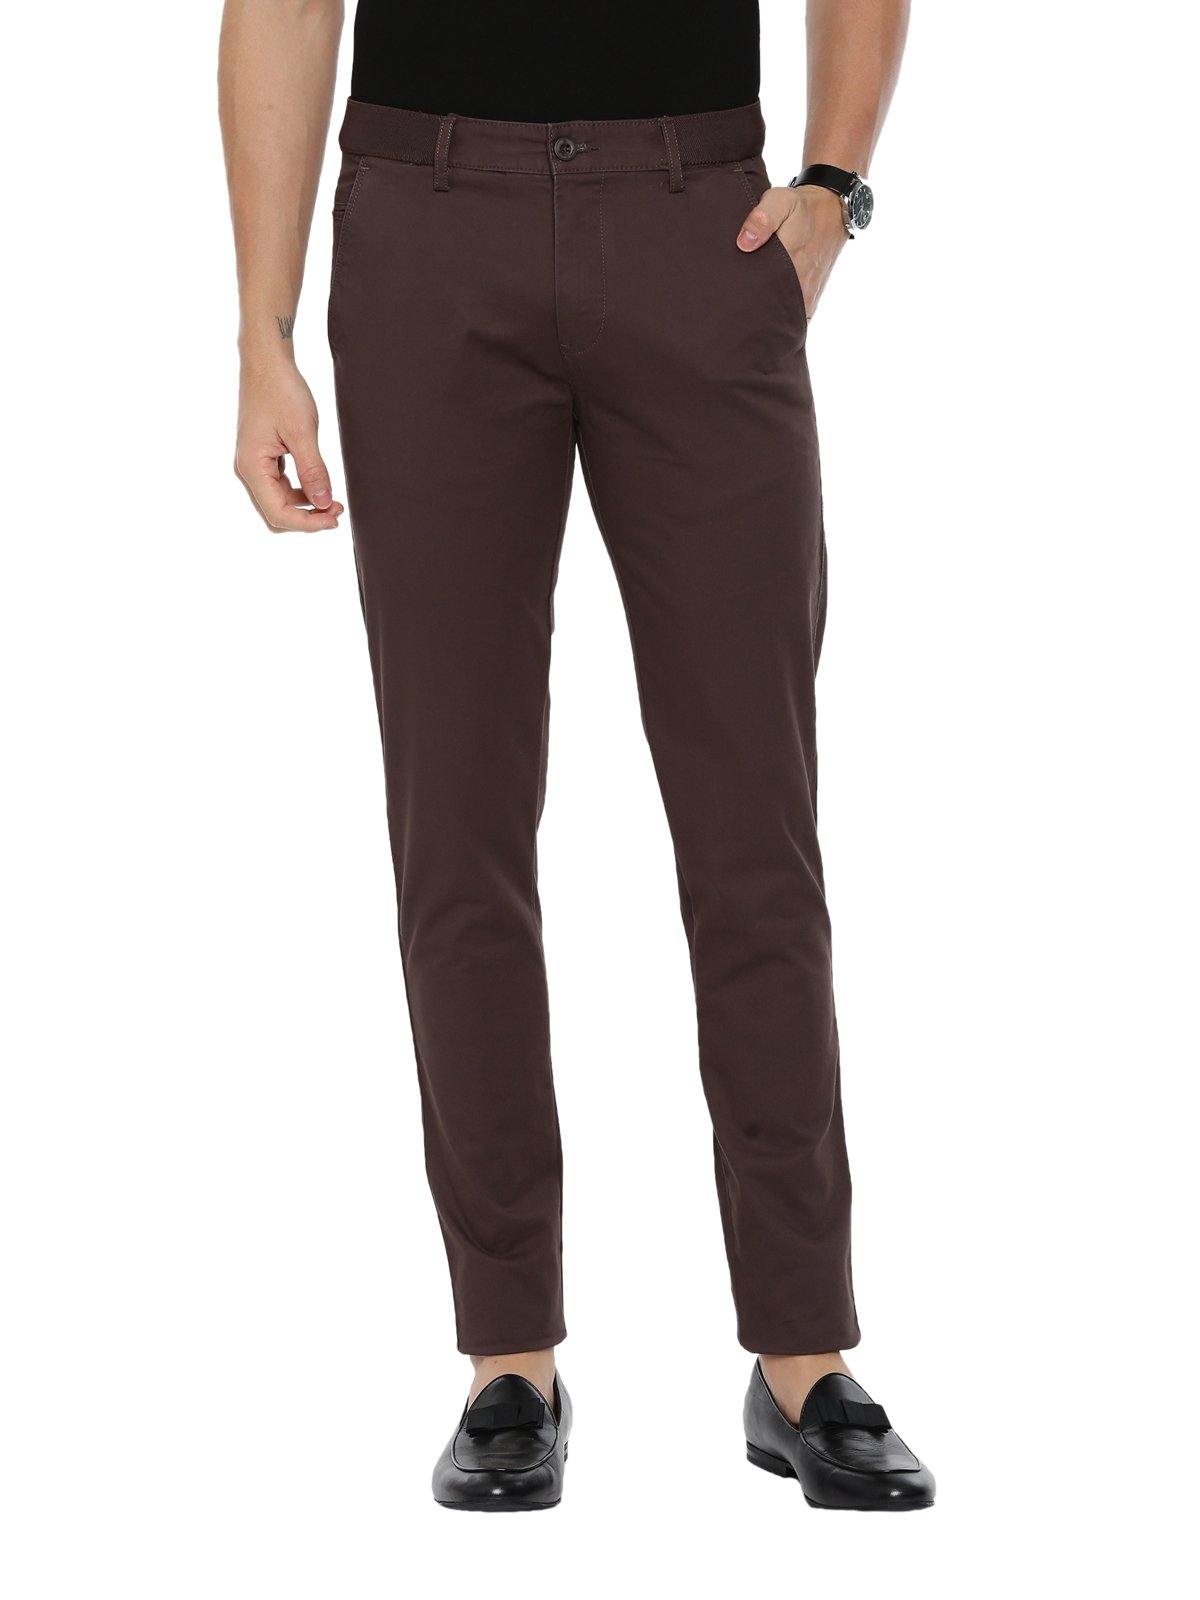 High-waisted tailored trousers - Black - Ladies | H&M IN